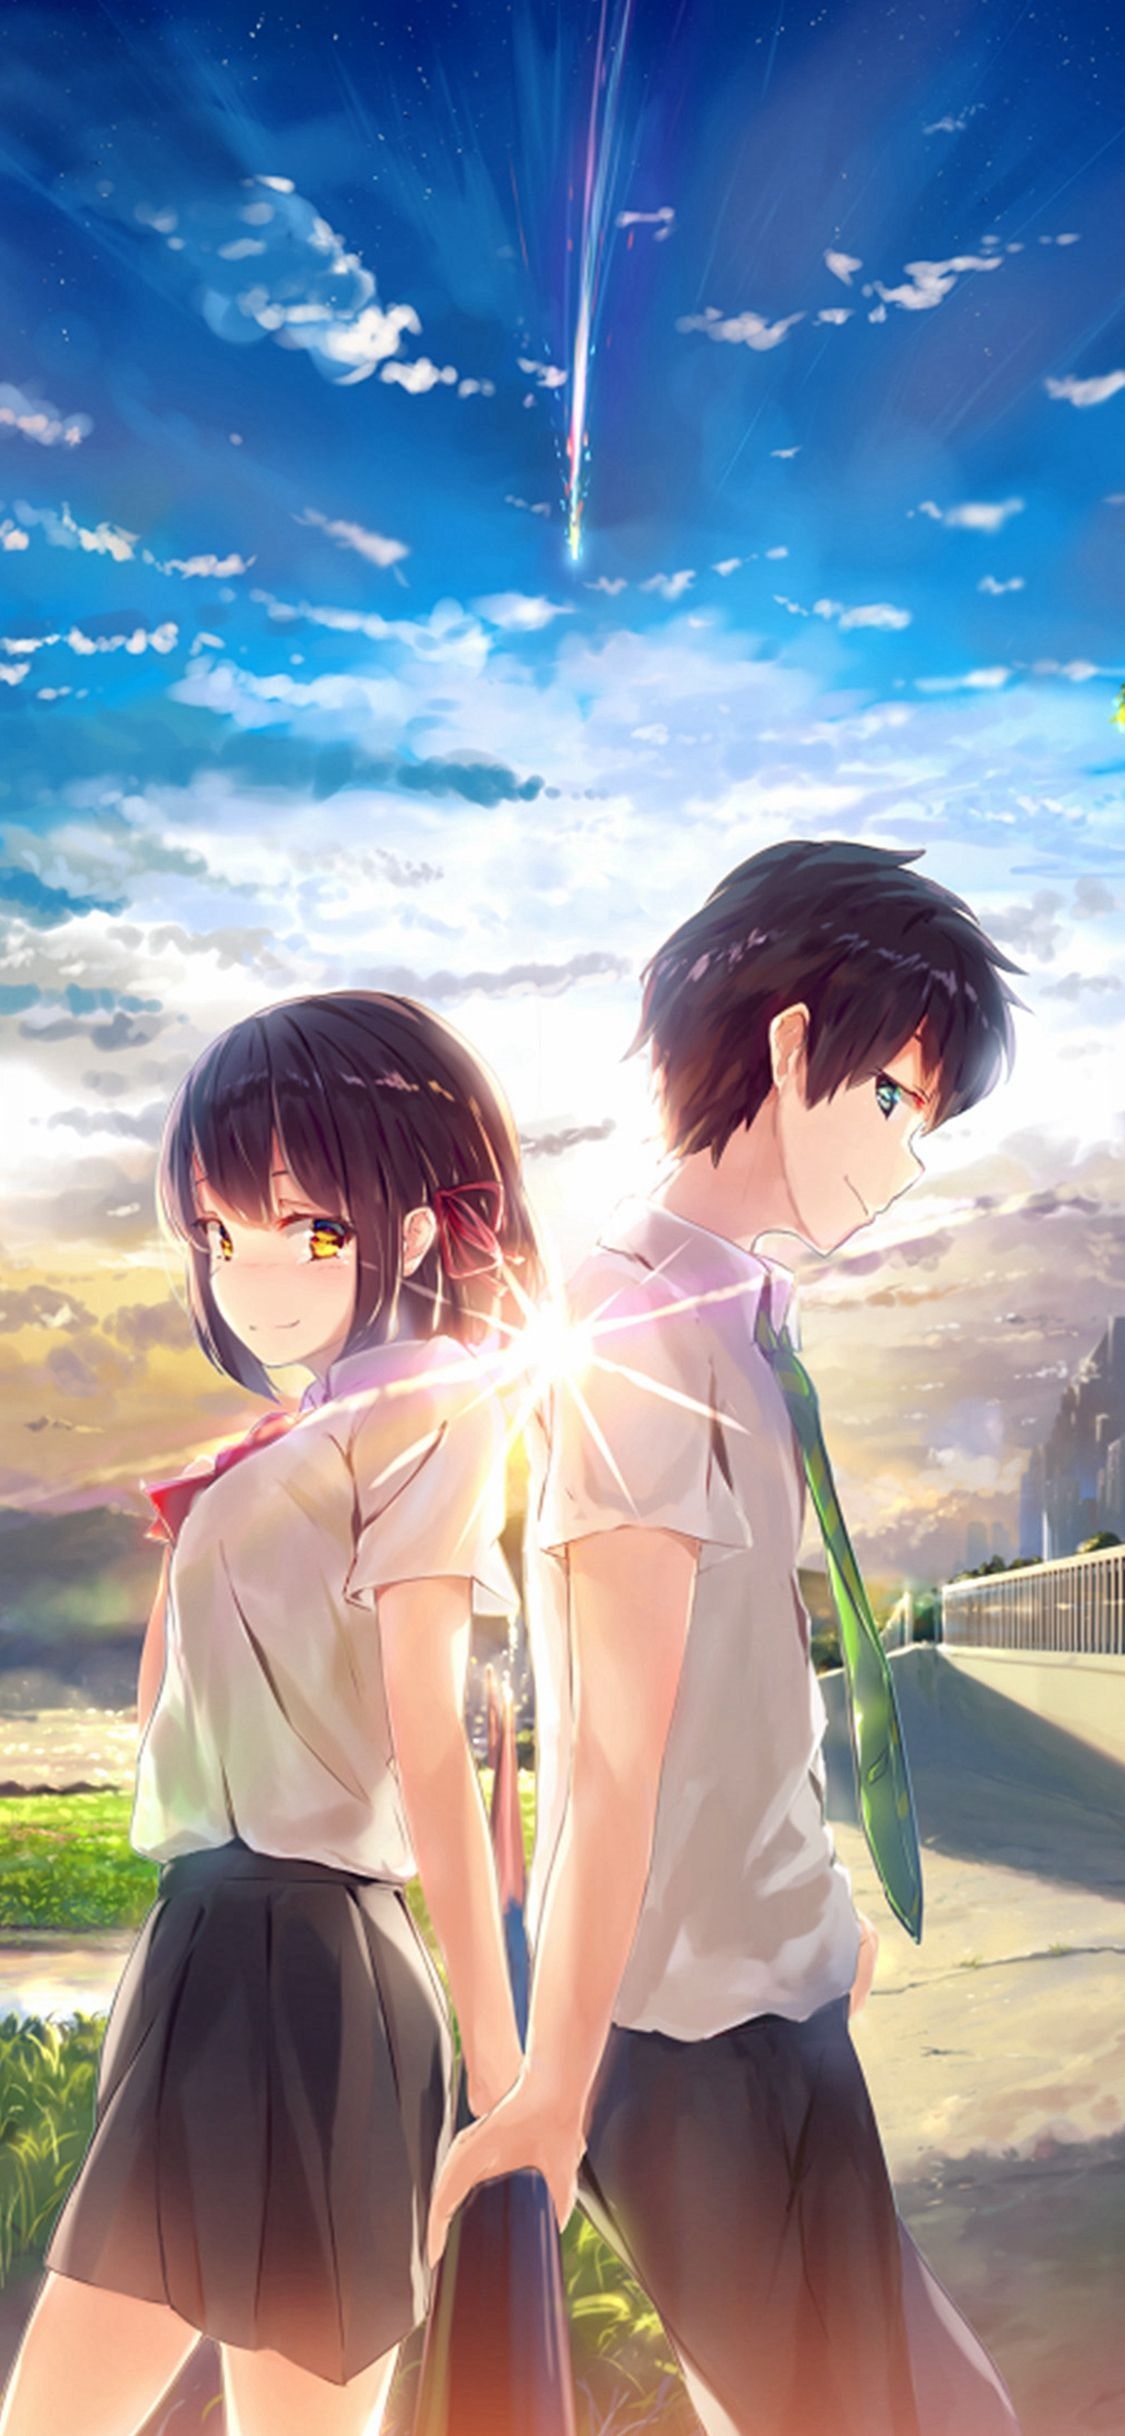 Anime Couple Wallpapers on